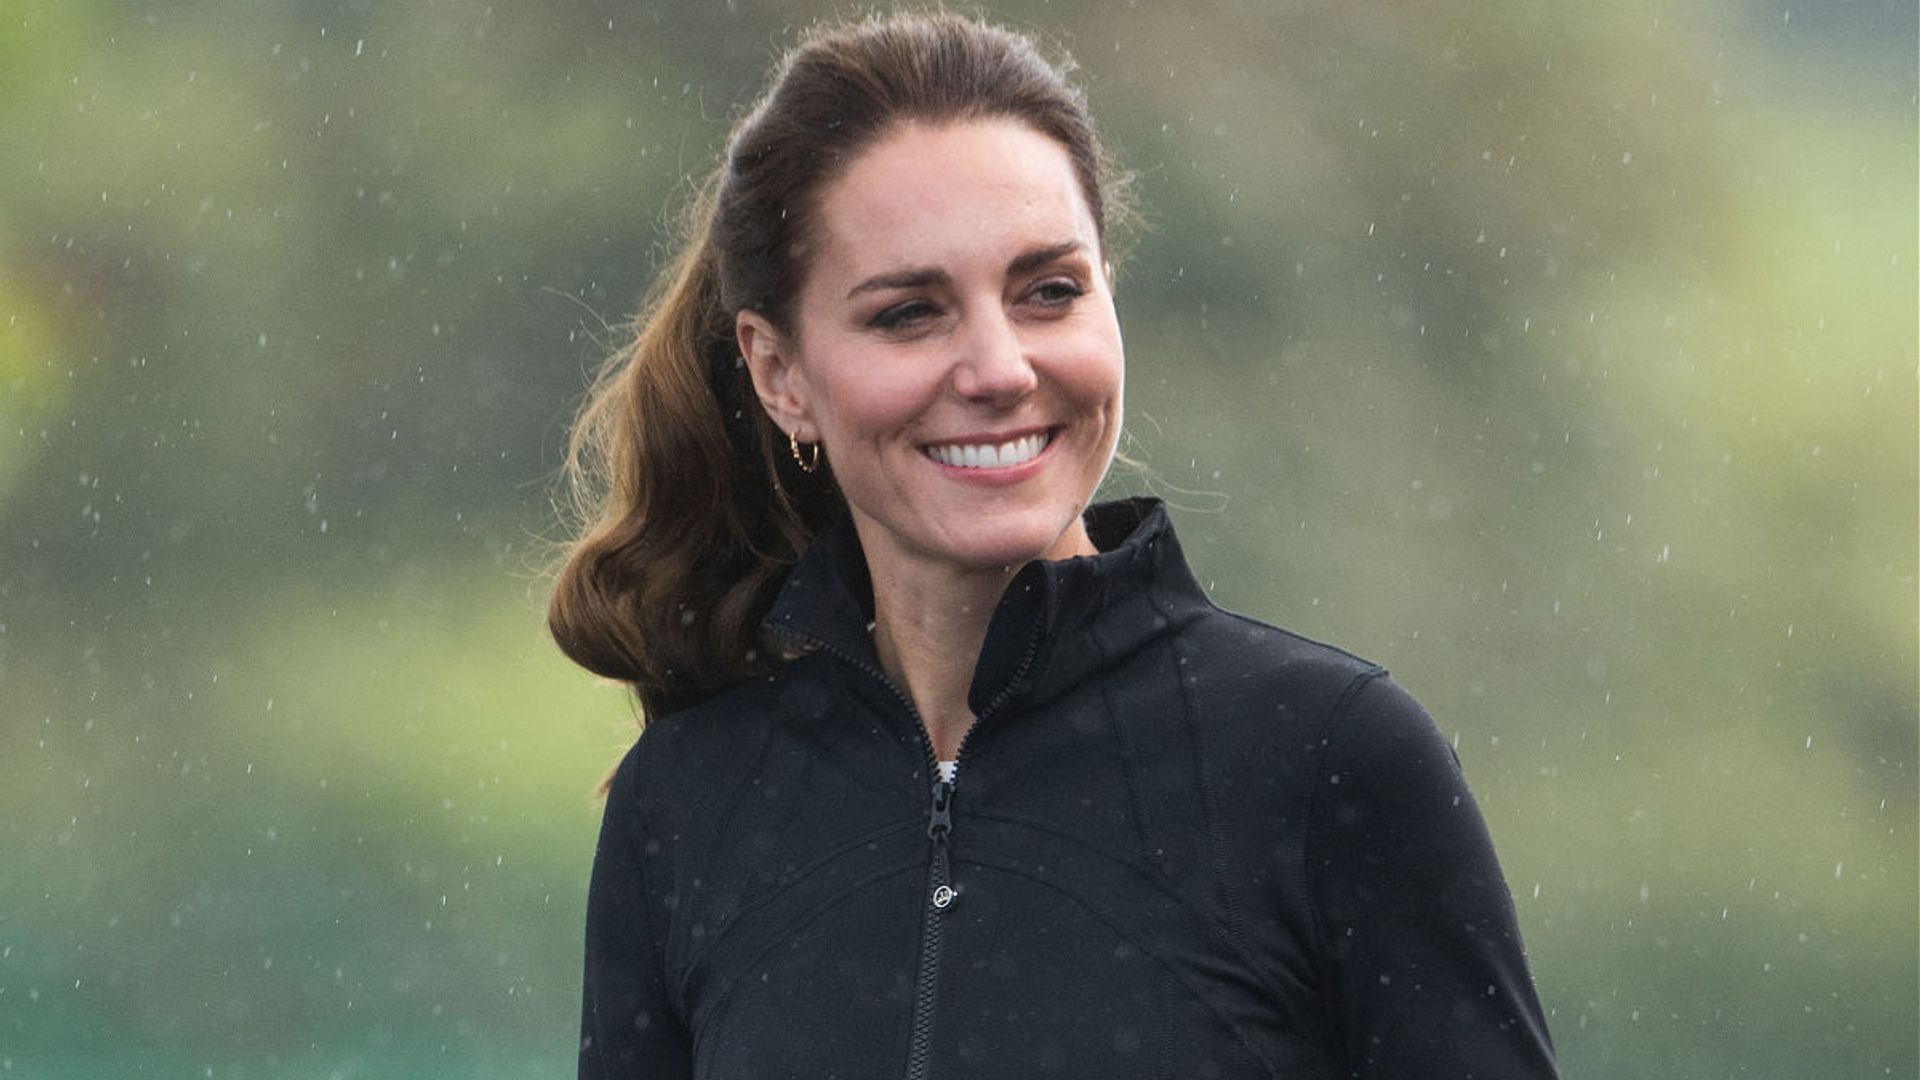 Princess Kate loves this Lululemon workout jacket - and you can shop it now